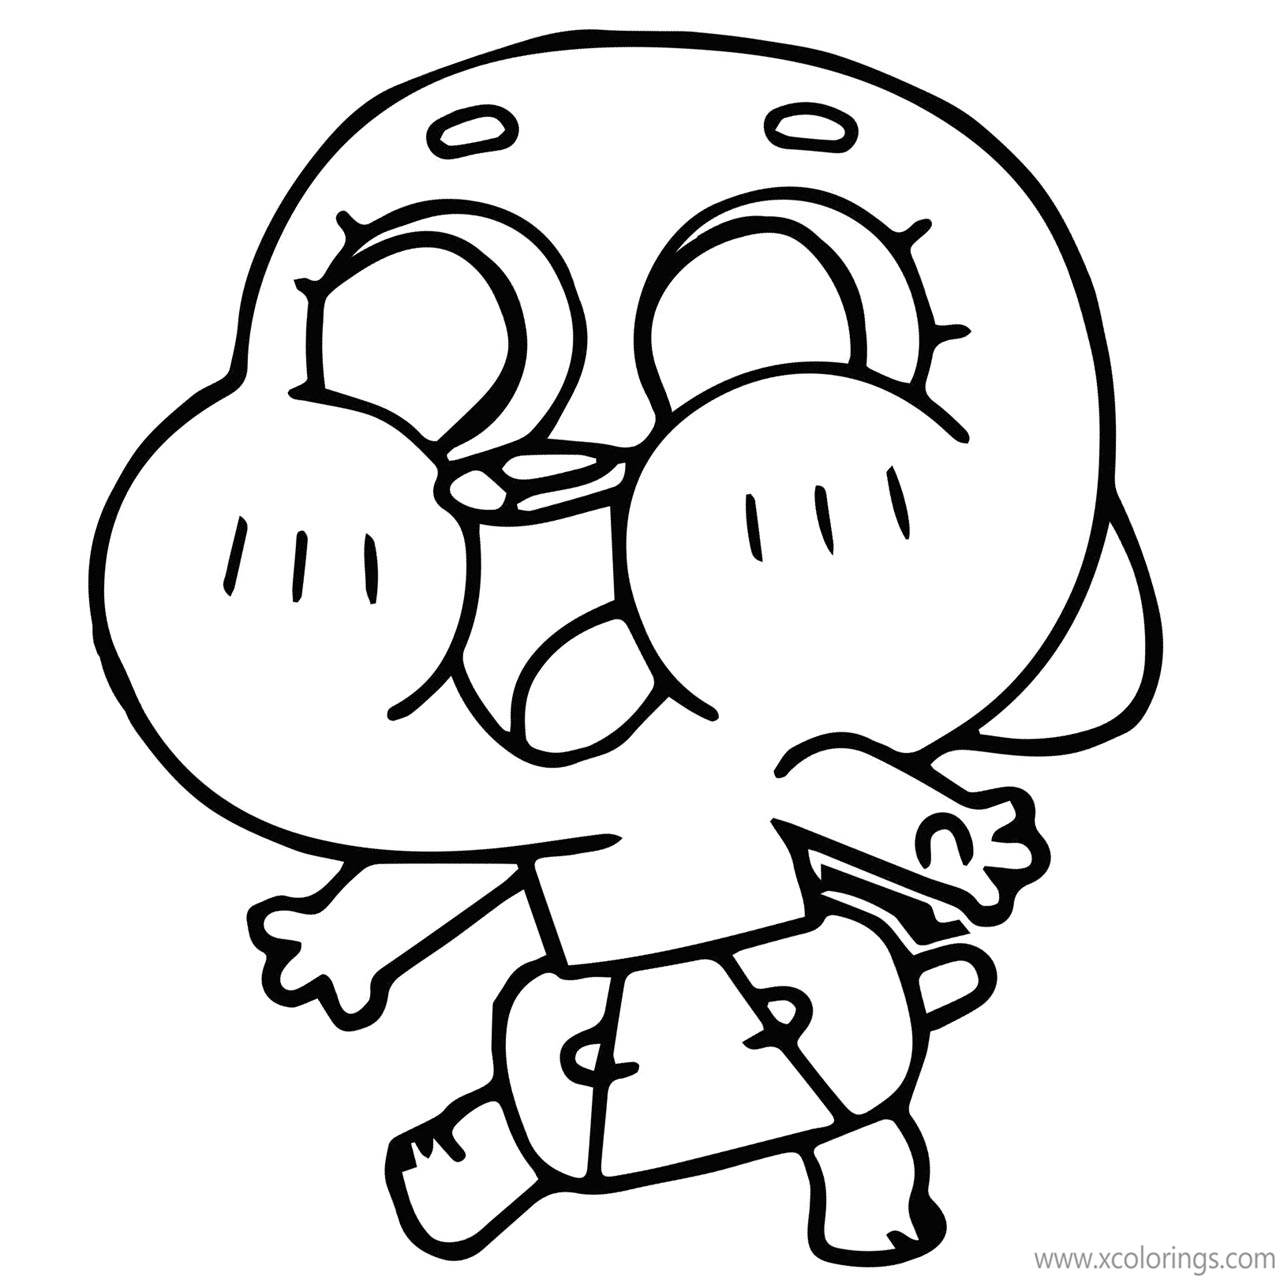 Free The Amazing World of Gumball Coloring Pages Baby Gumball printable